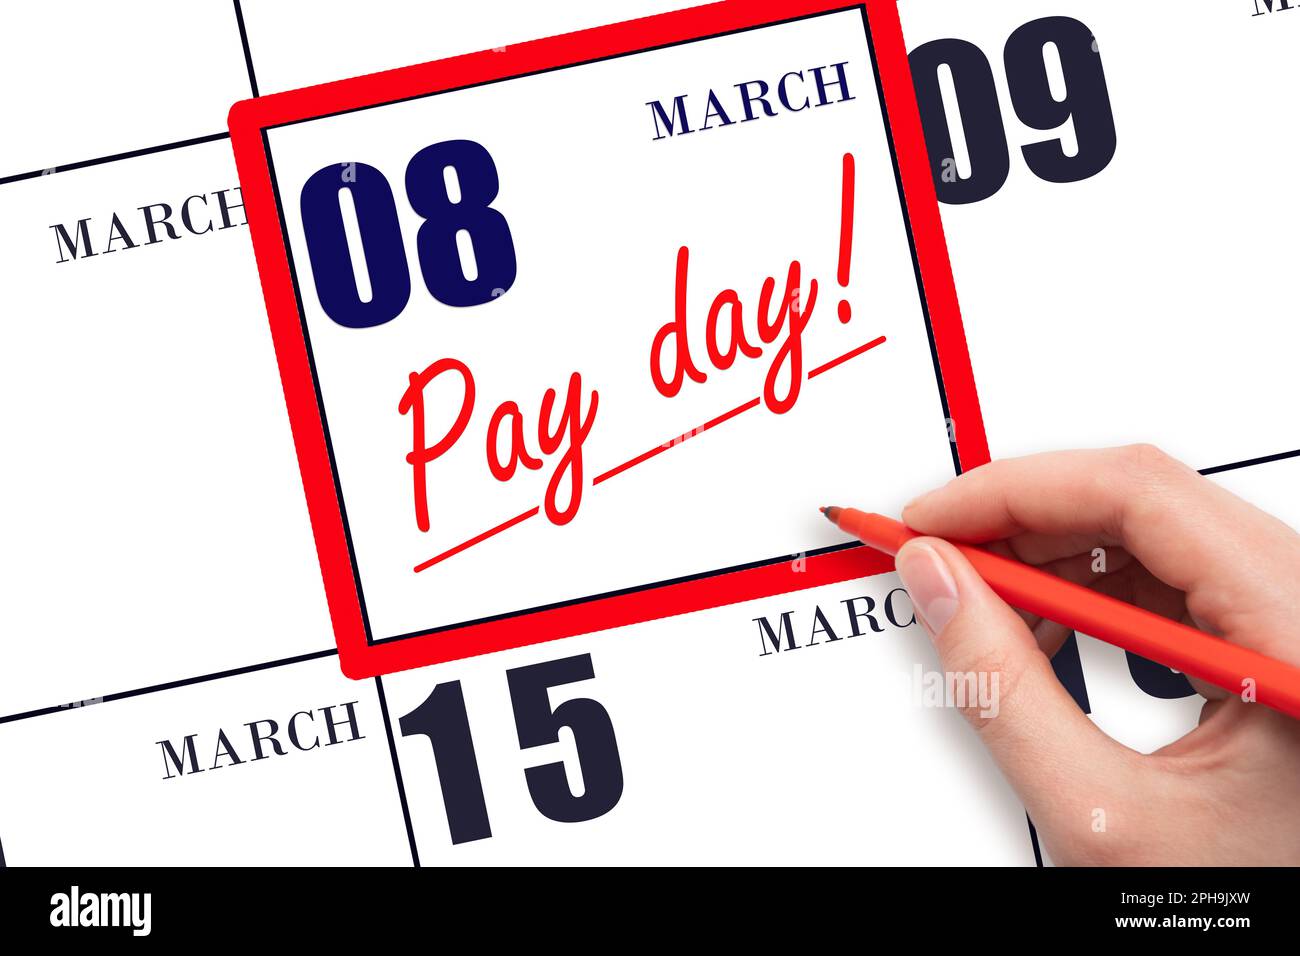 8th day of March. Hand writing text PAY DATE on calendar date March 8 and underline it. Payment due date.  Reminder concept of payment. Spring month, Stock Photo